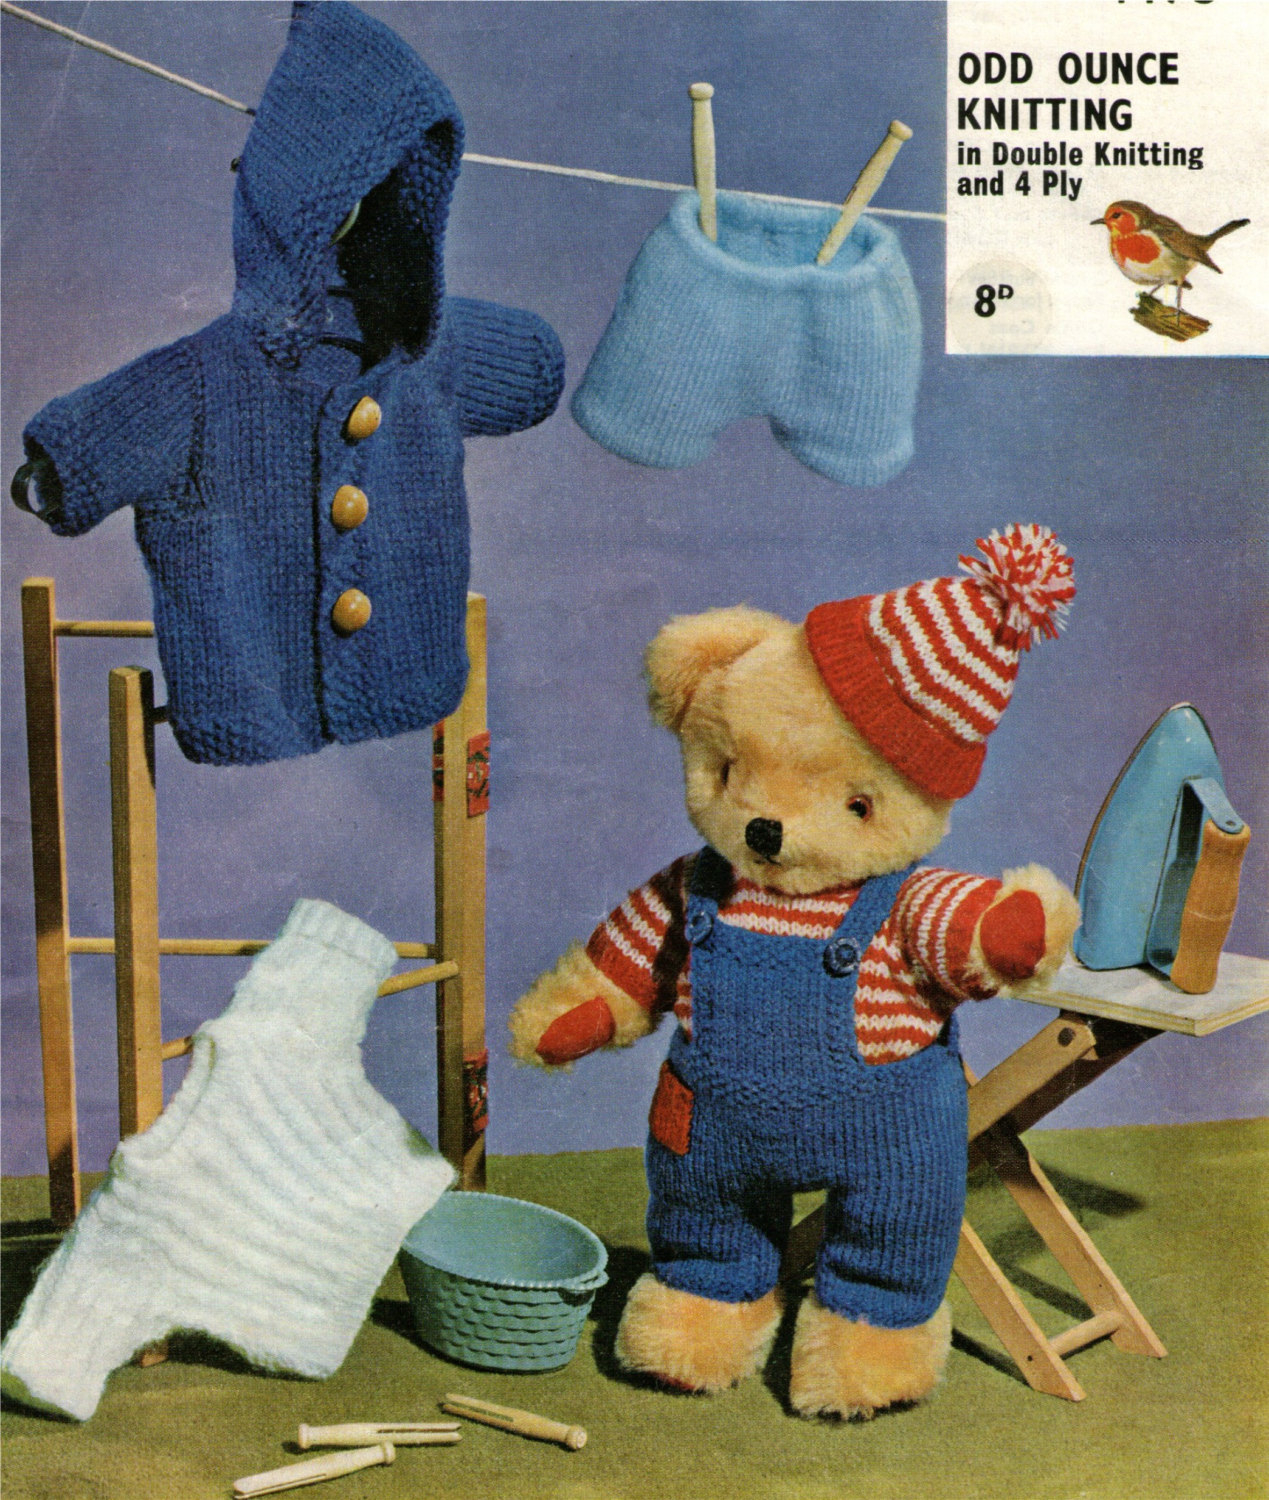 Knitting Patterns For Teddy Bear Clothes Teddy Bear Clothes Knitting Pattern Pdf For 12 Inch Teddy Bears Teddy Outfit Pattern Dungarees Jacket Jumpers Hat And Shorts Download